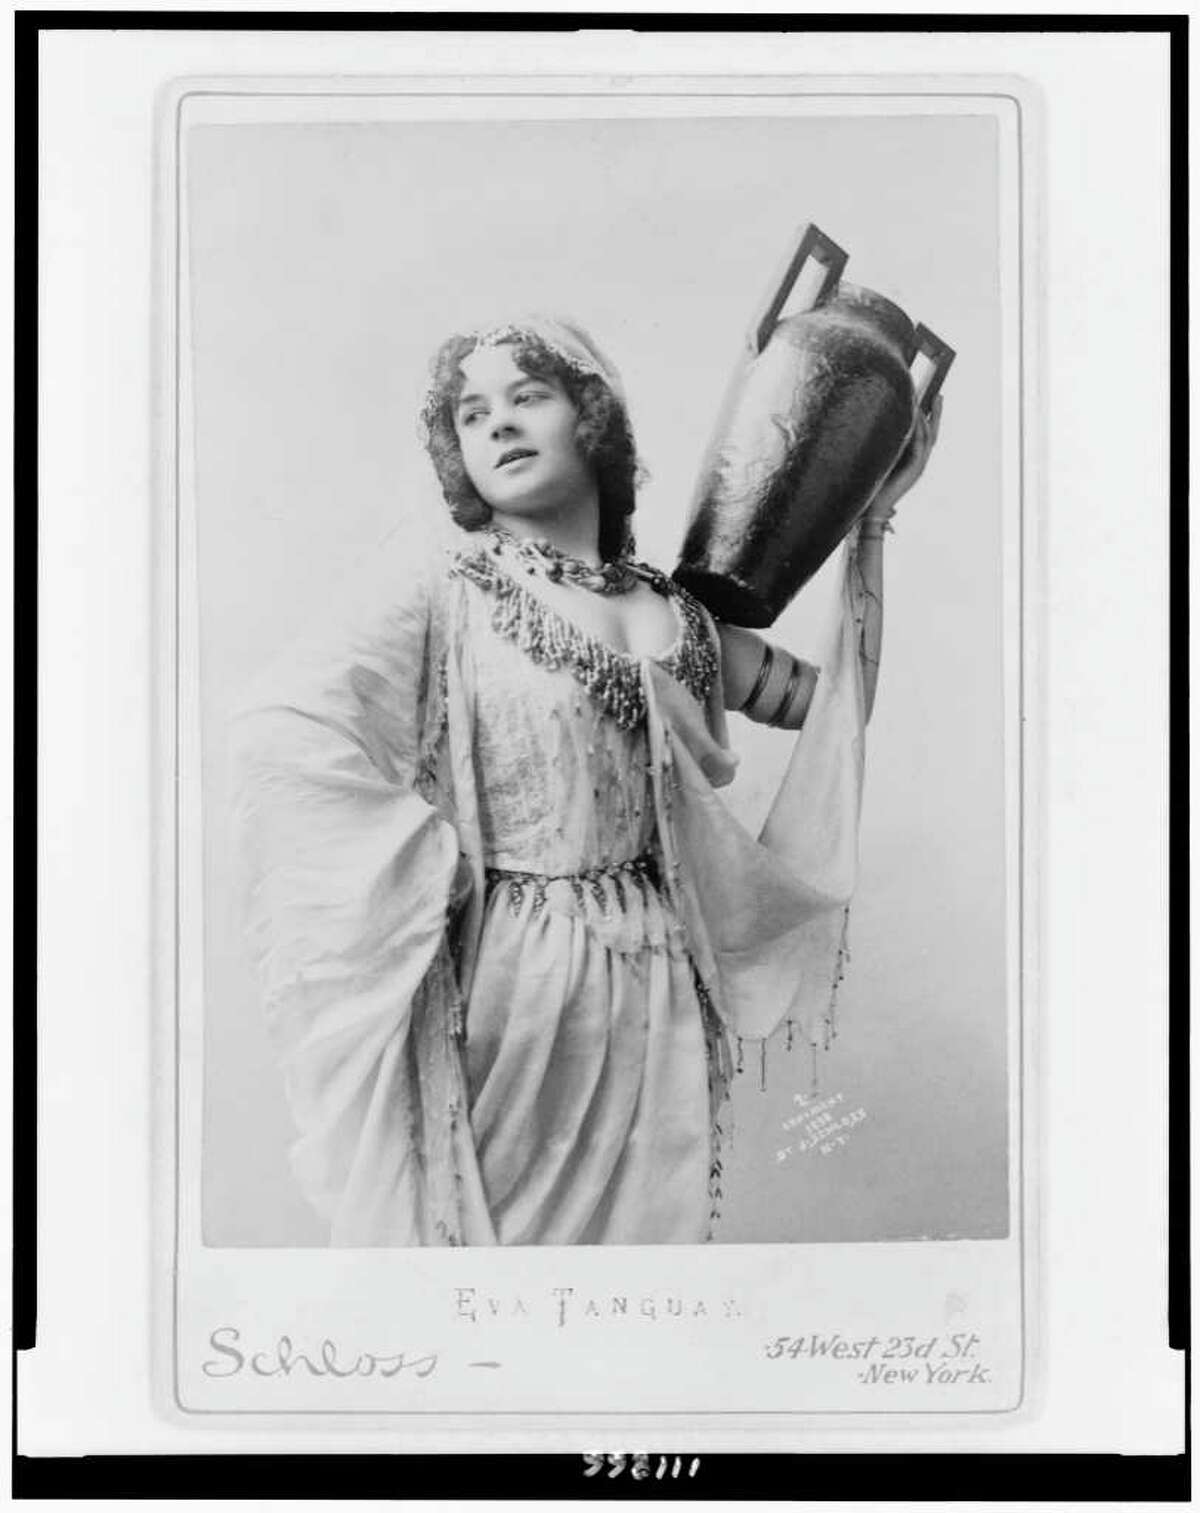 Eva Tanguay, pictured here in 1898, is said to haunt the Cohoes Music Hall. (J. Schloss / Library of Congress)